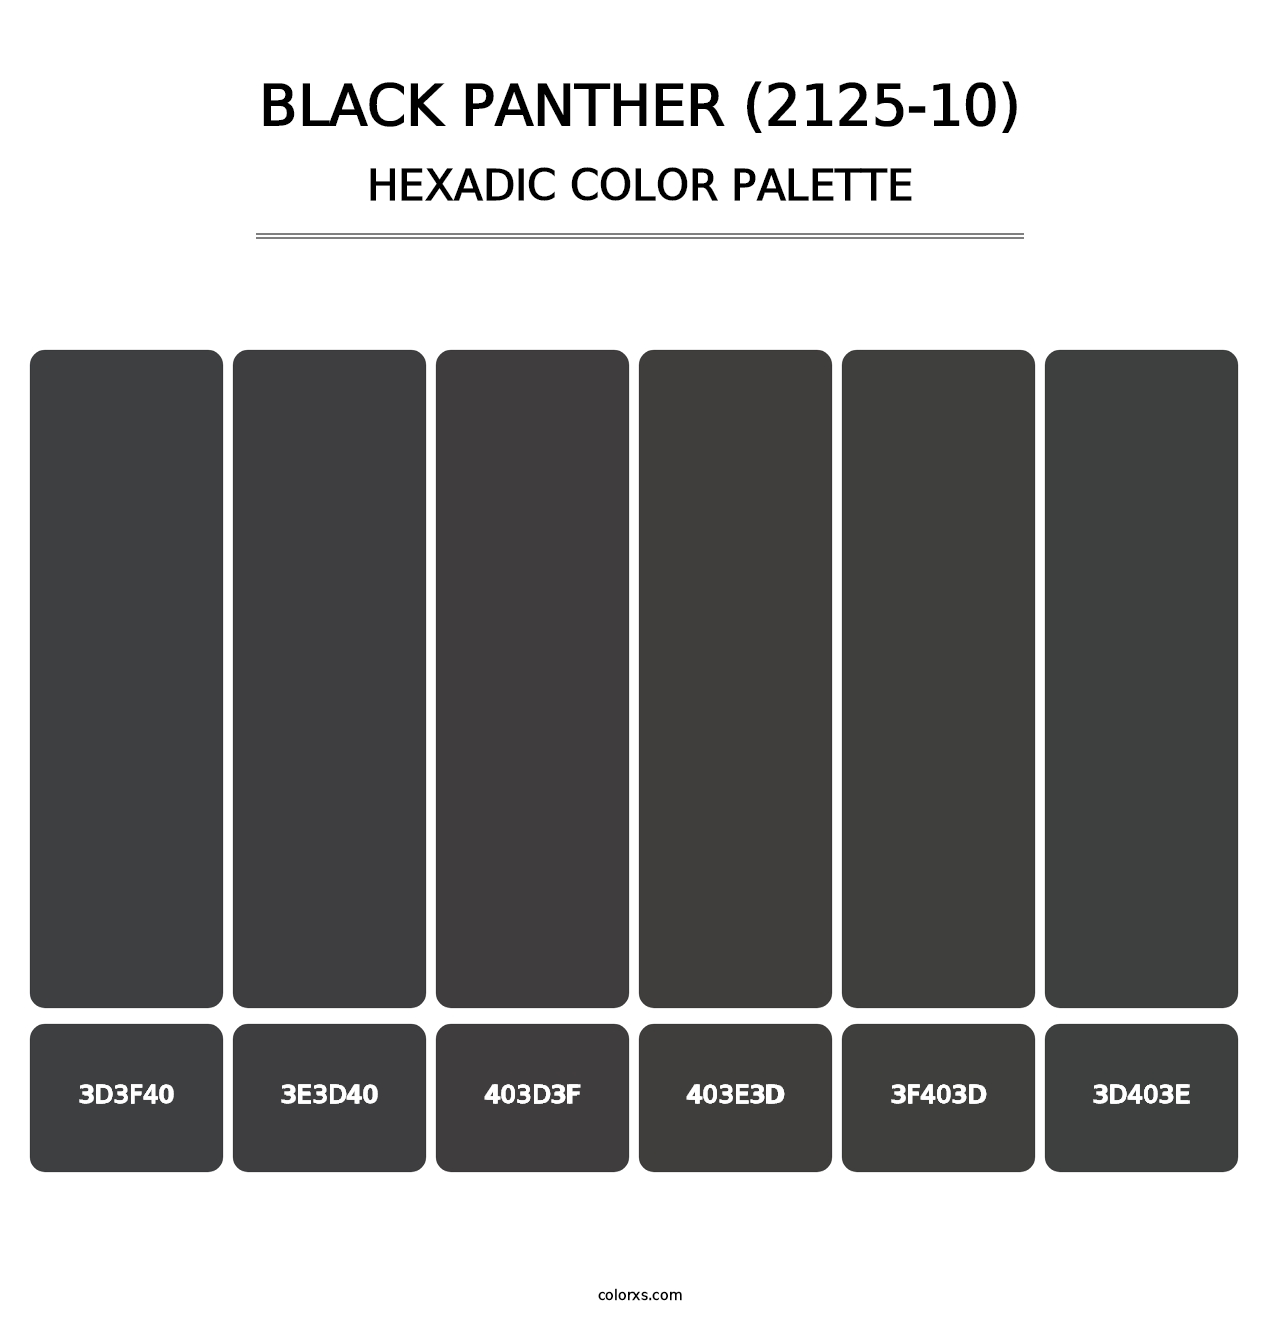 Black Panther (2125-10) - Hexadic Color Palette